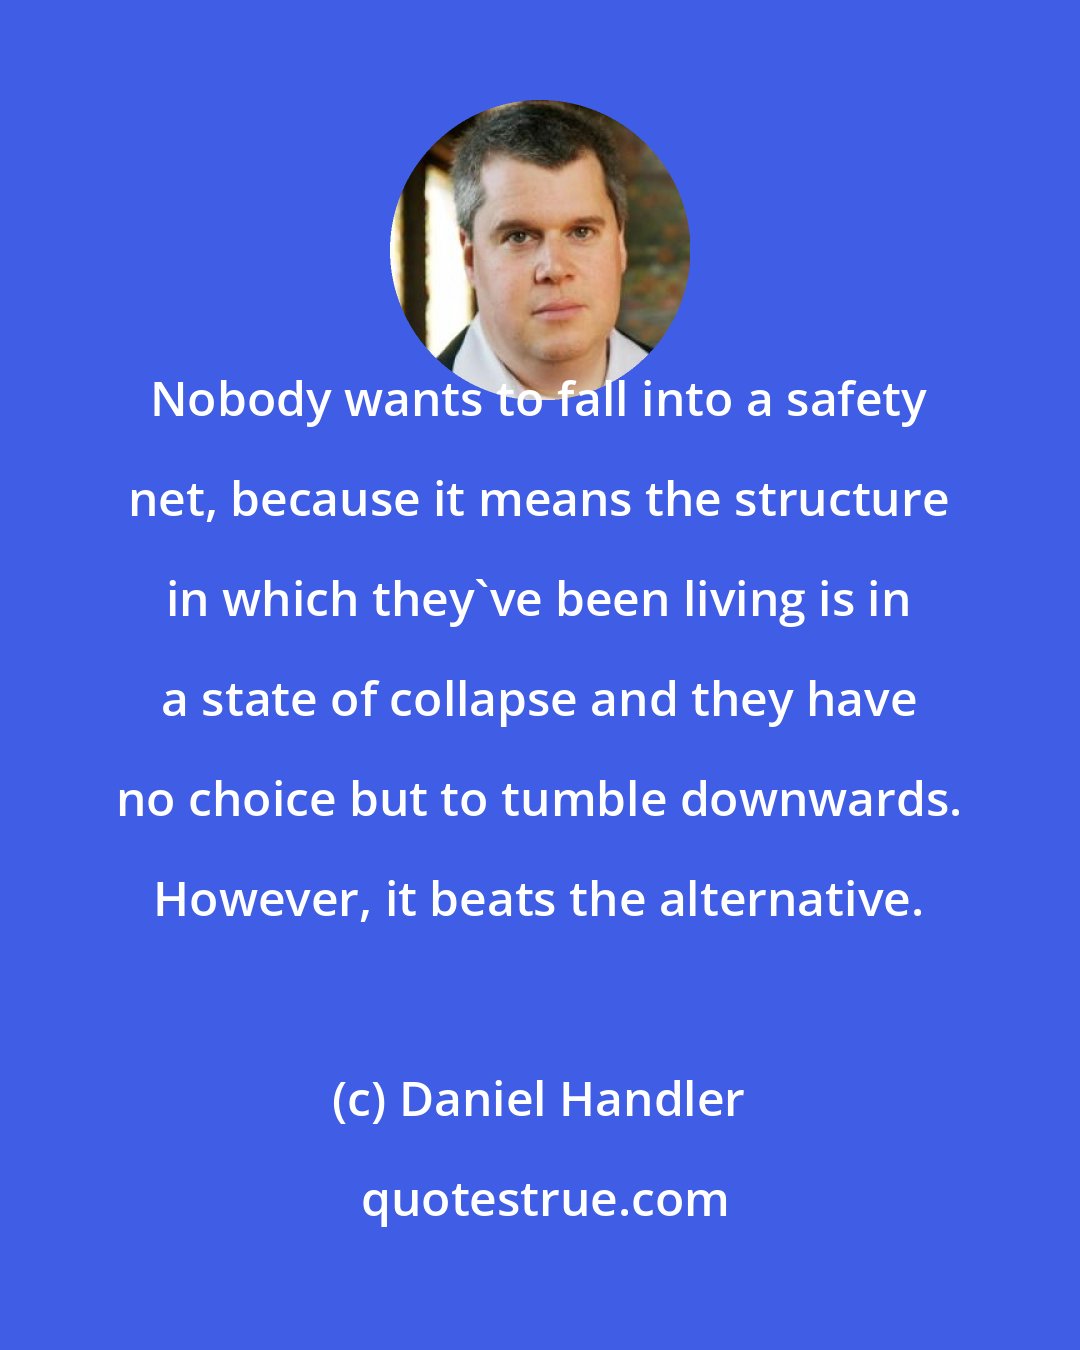 Daniel Handler: Nobody wants to fall into a safety net, because it means the structure in which they've been living is in a state of collapse and they have no choice but to tumble downwards. However, it beats the alternative.